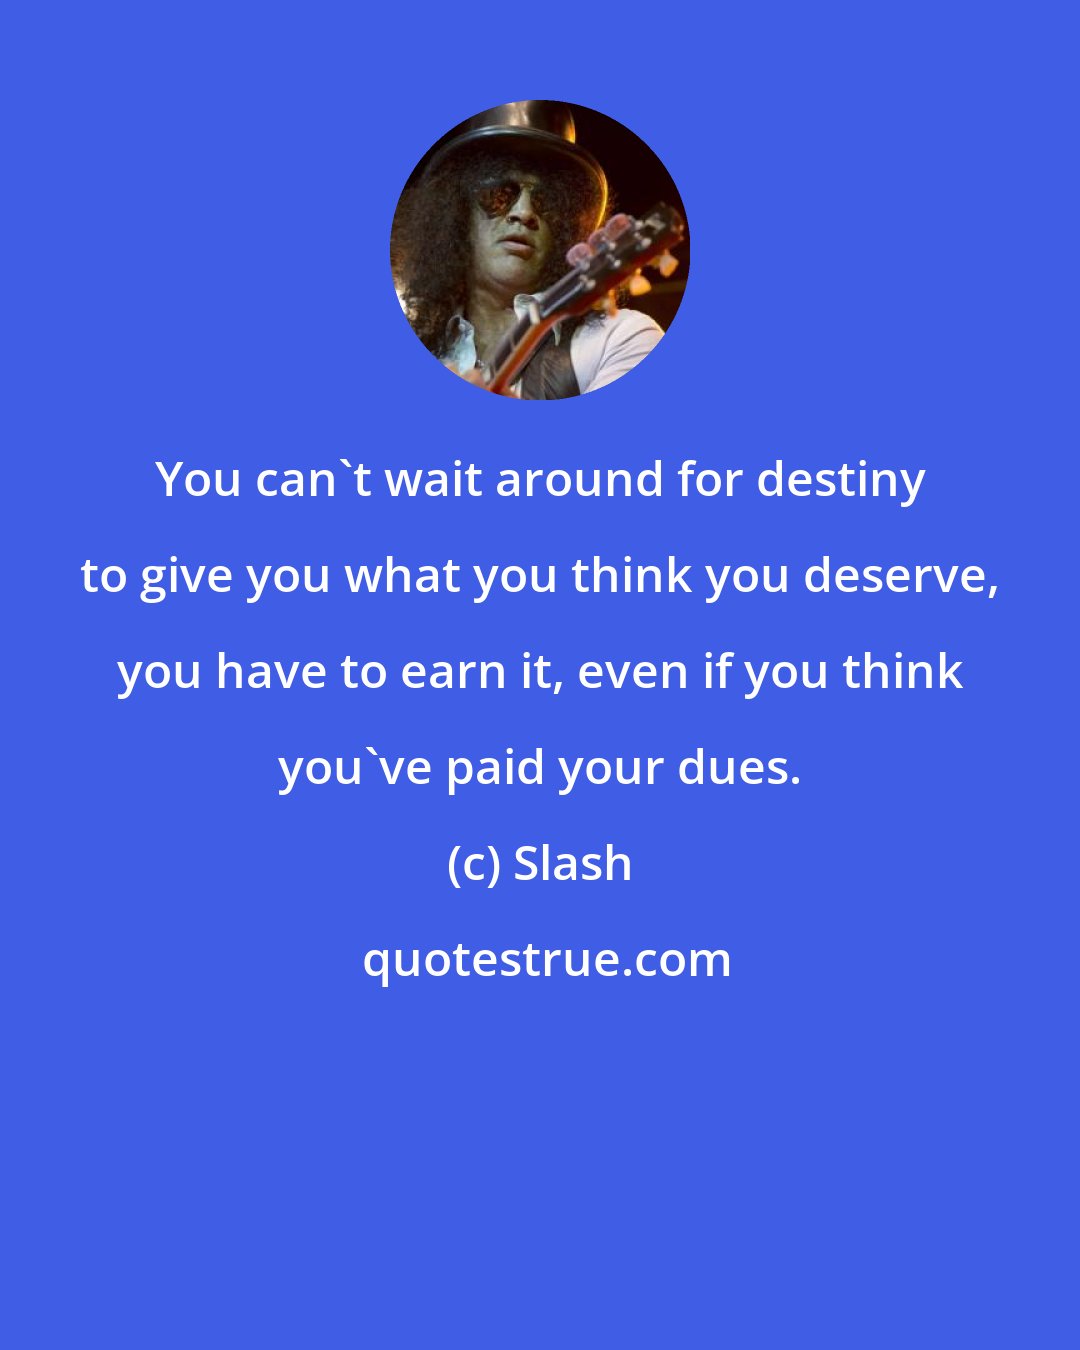 Slash: You can't wait around for destiny to give you what you think you deserve, you have to earn it, even if you think you've paid your dues.